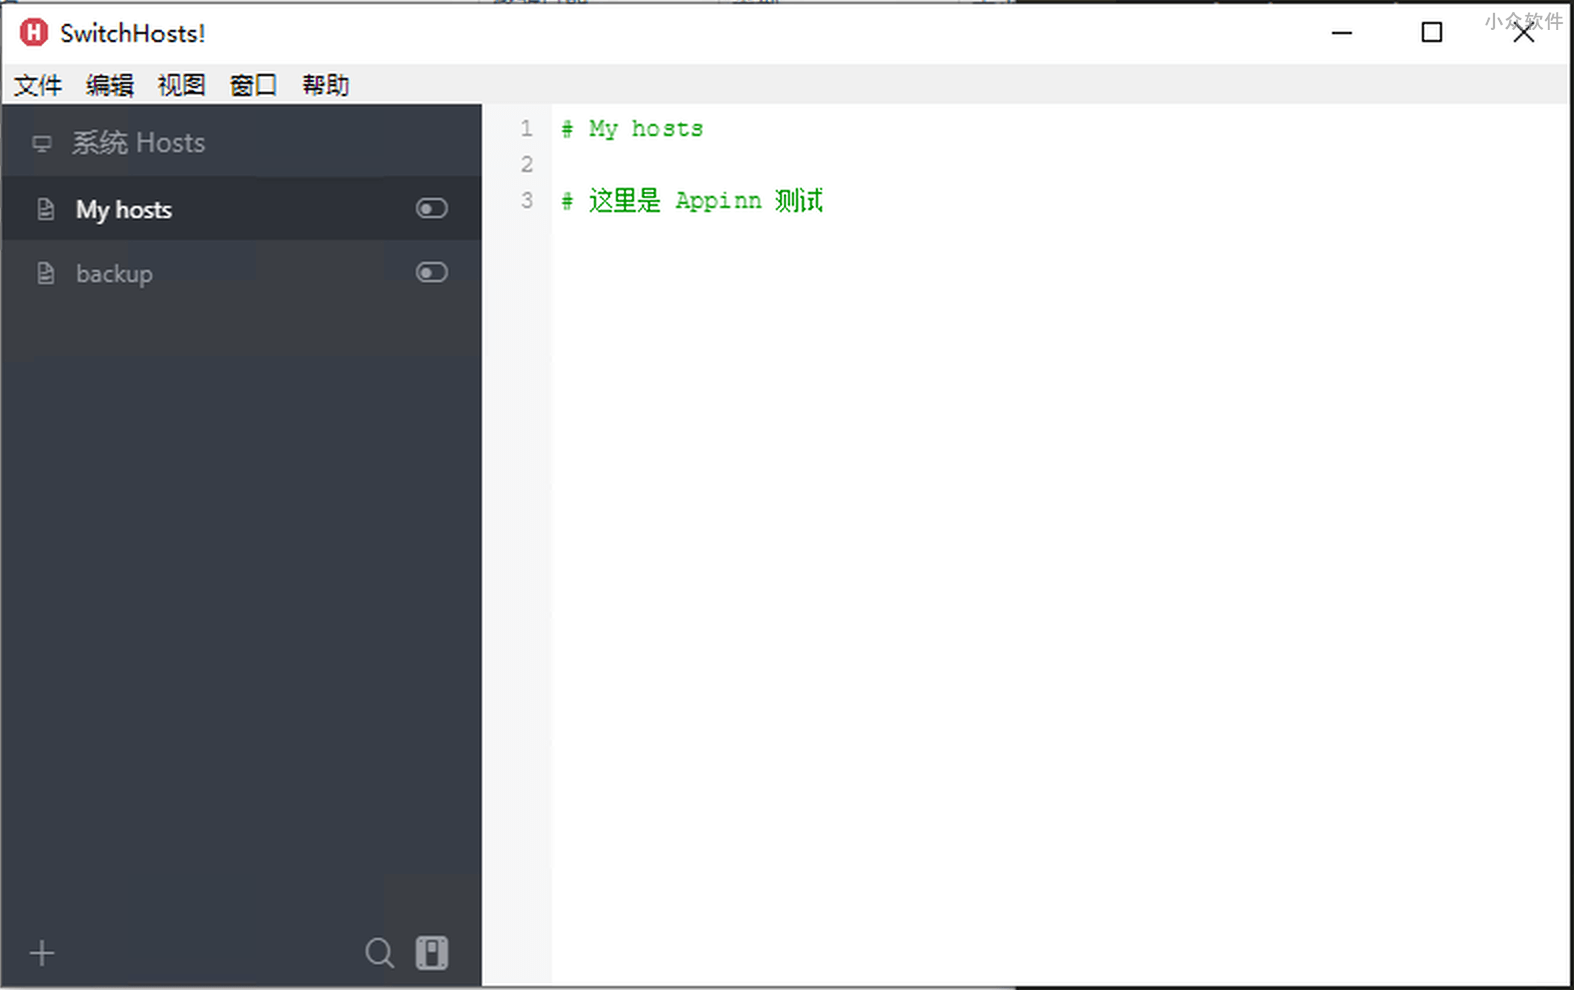 SwitchHosts! – 快速添加、修改、切换 hosts 文件 [Win/macOS/Linux]